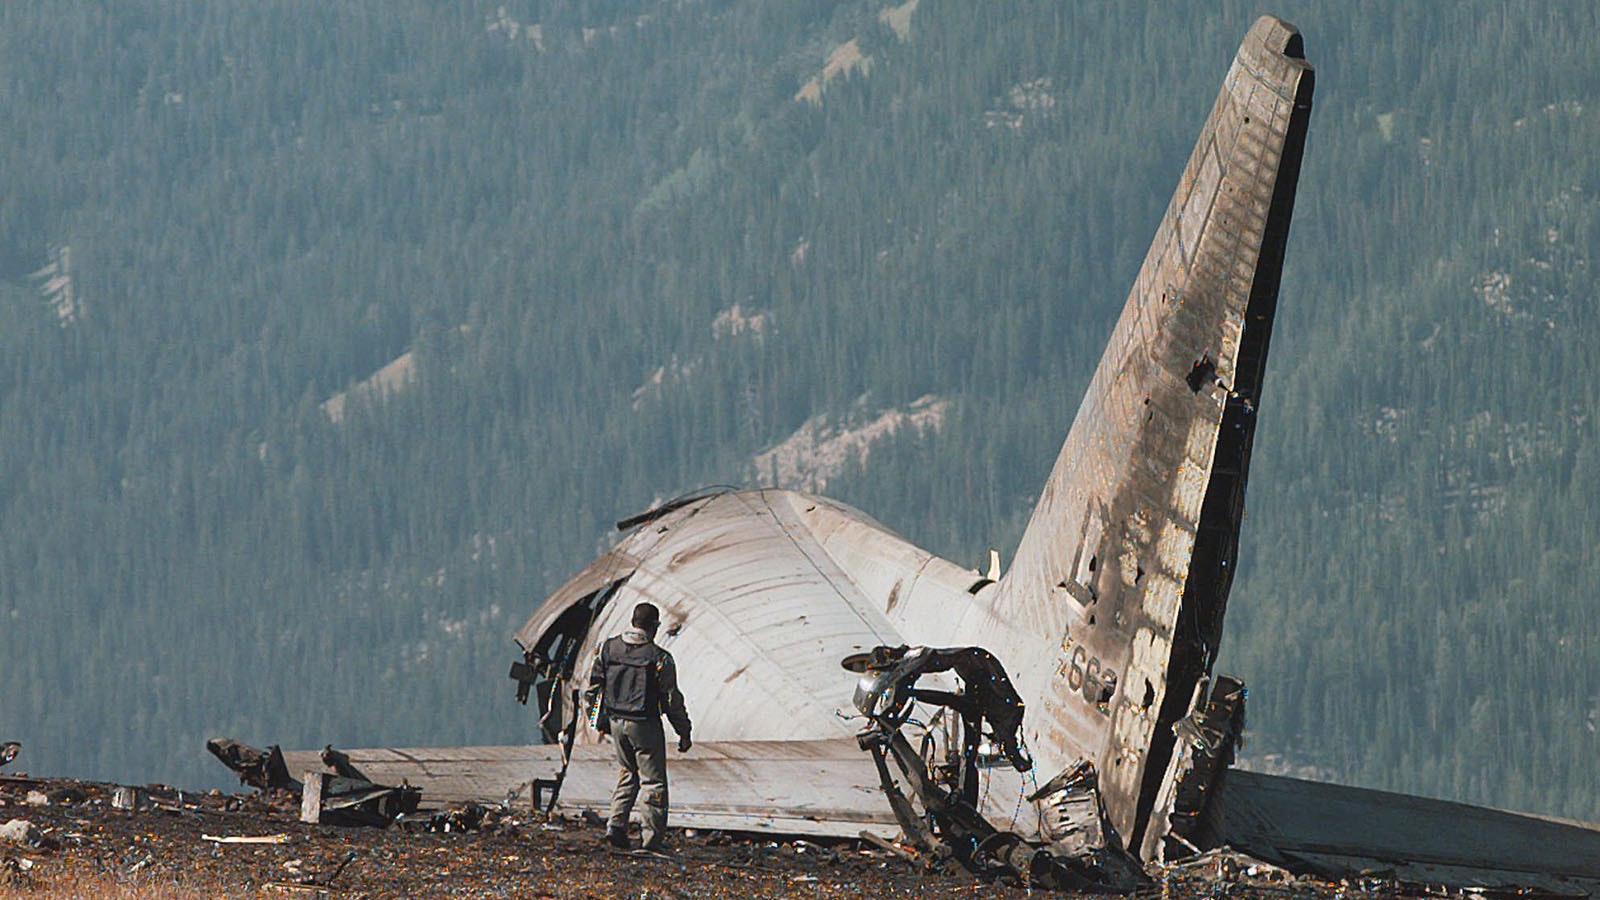 A member of the Air Force crash investigation team surveys the tail section of the Air Force C-130 that crashed and burned near the top of Sheep Mountain near Jackson, Wyoming, on Tuesday, Aug. 20, 1996. The C-130, which carried support equipment for President Clinton's vacation, went down on takeoff late Saturday night. Nine people were killed in the crash.